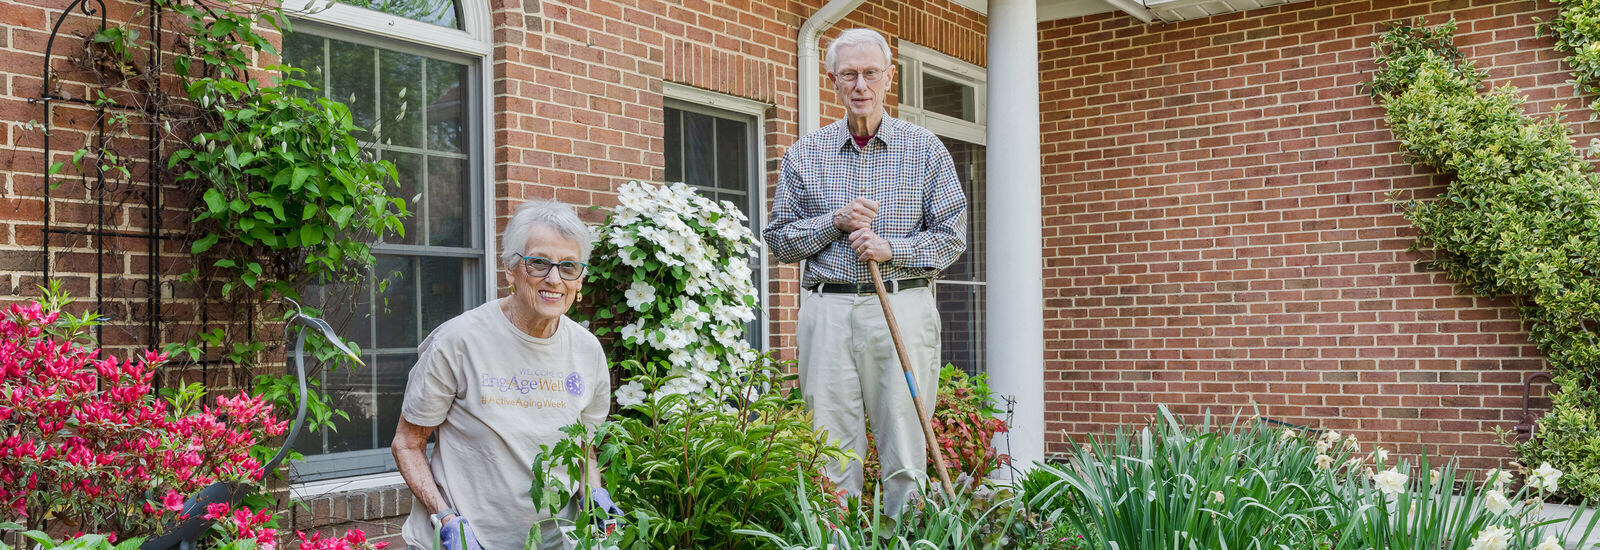 couple working in garden in front of brick Villa by entrance